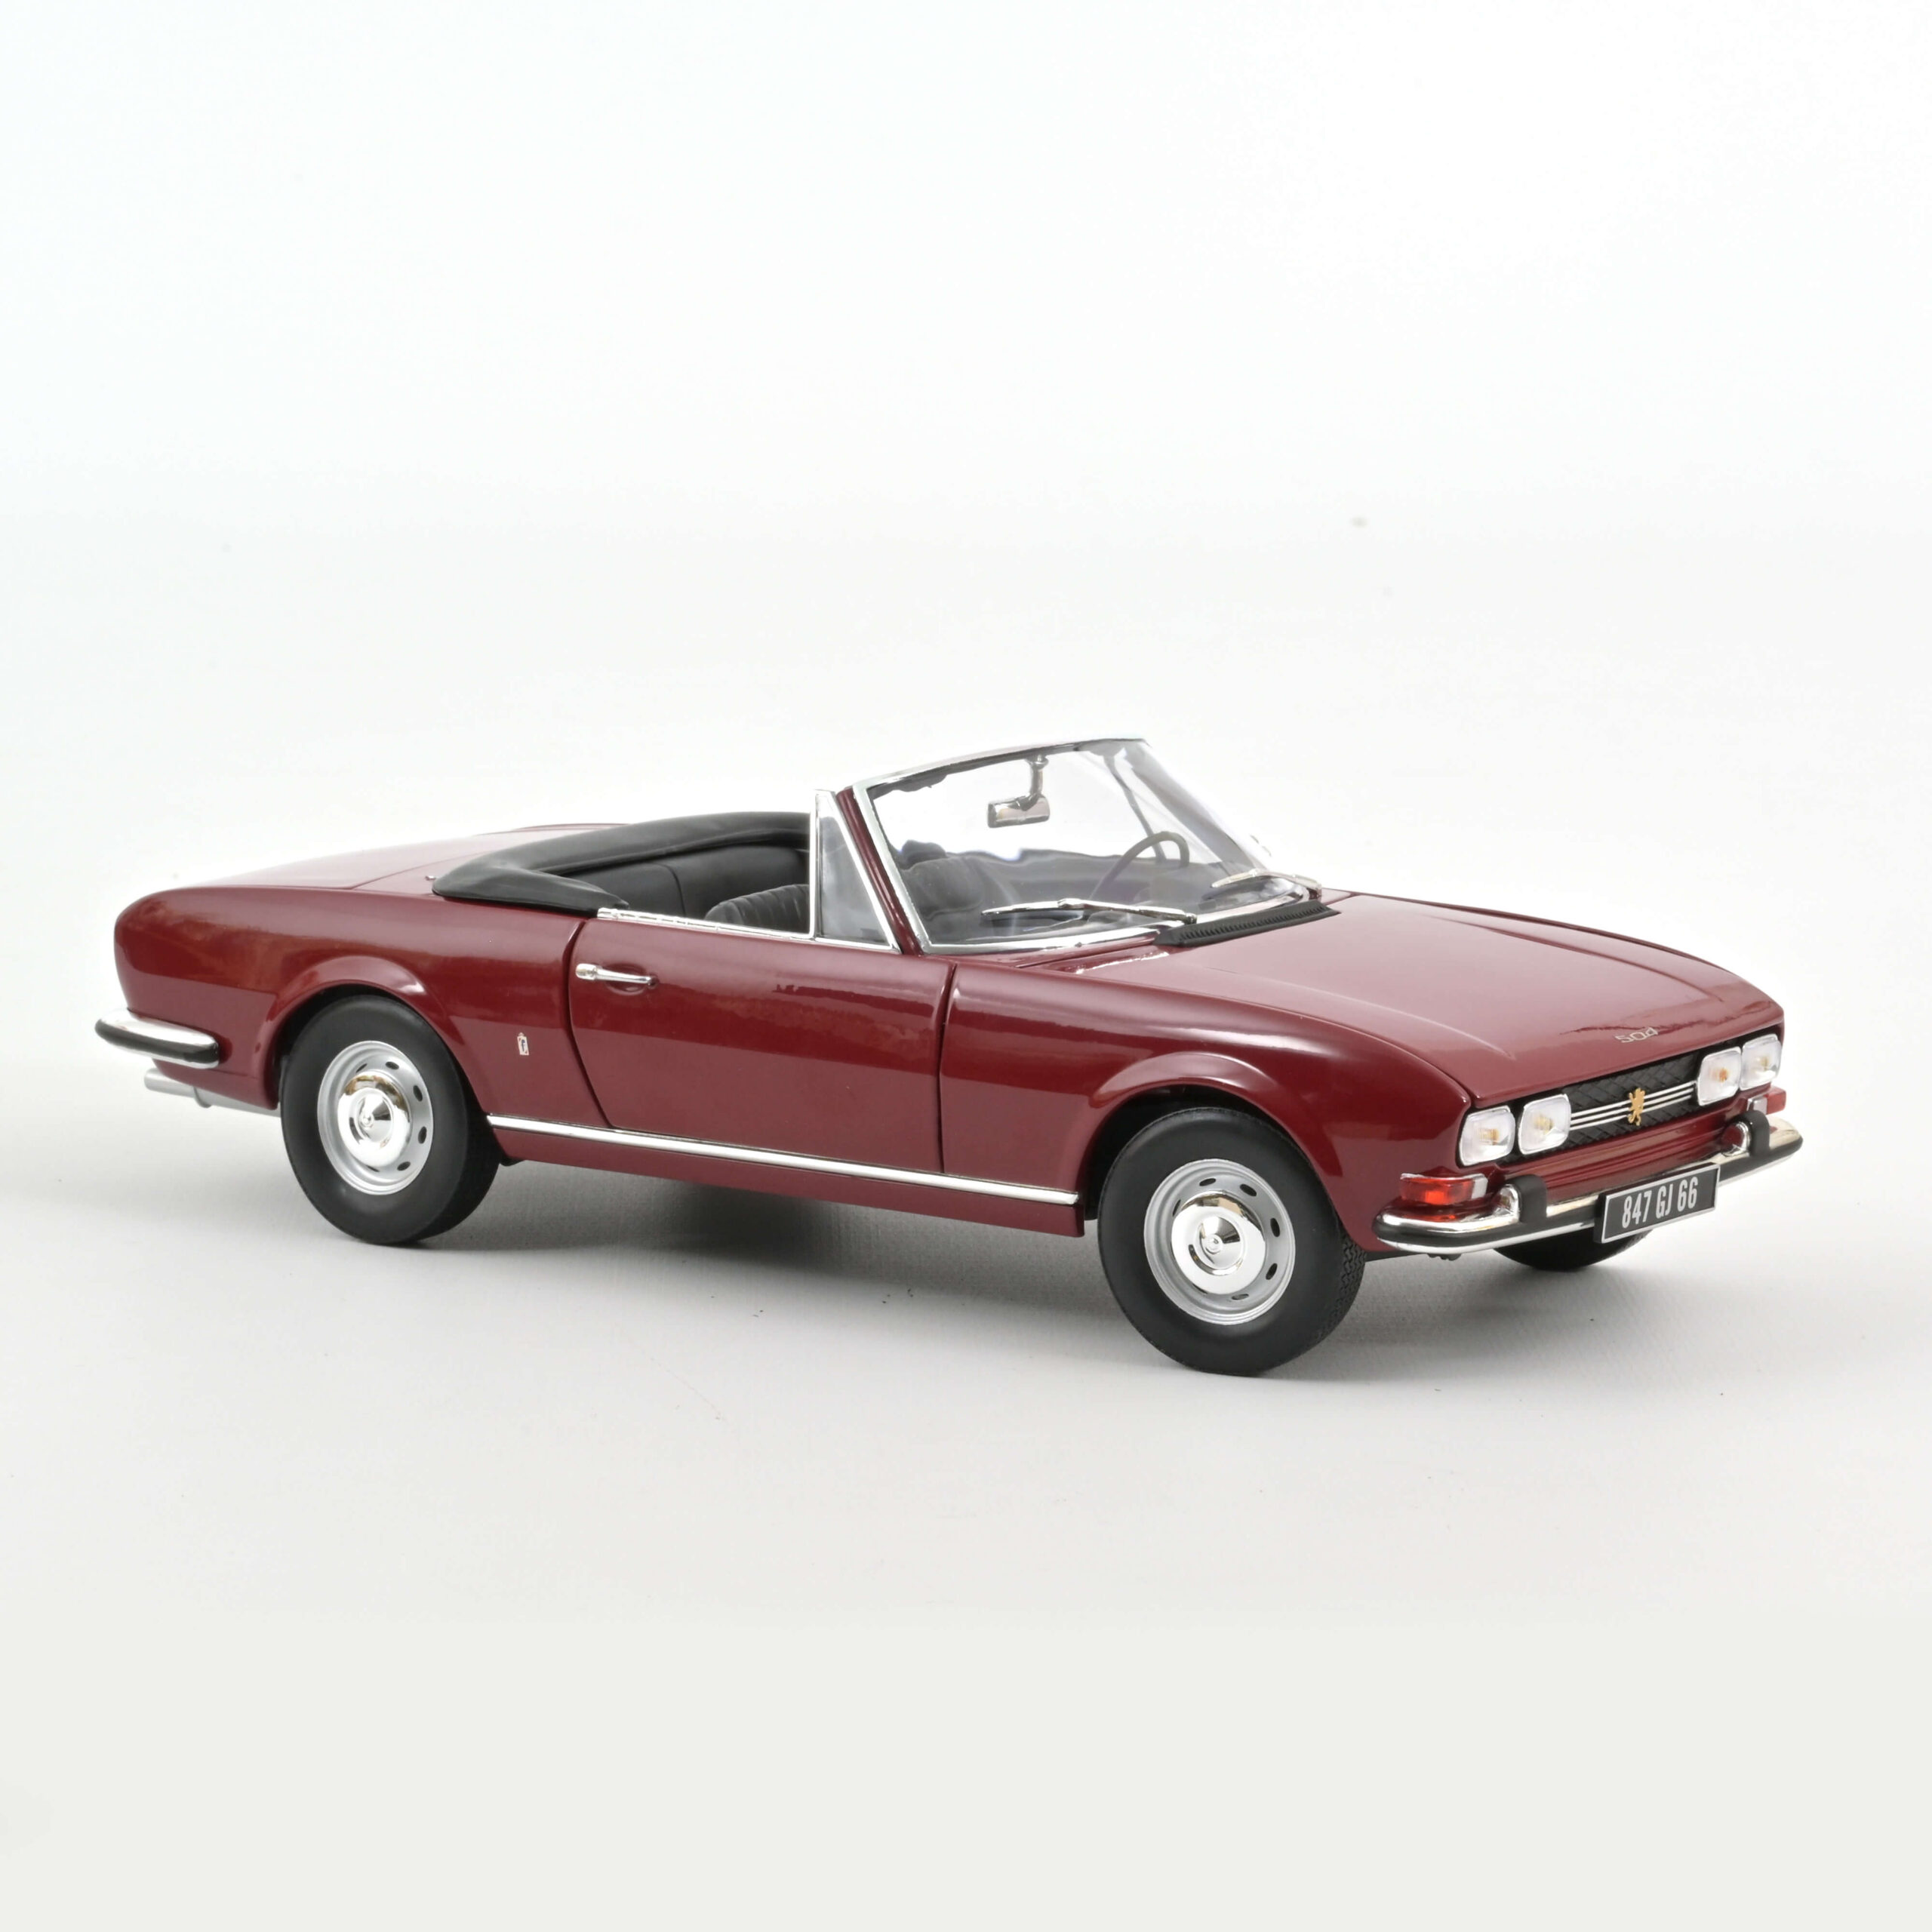 Peugeot 504 Cabriolet 1969 Andalou Red